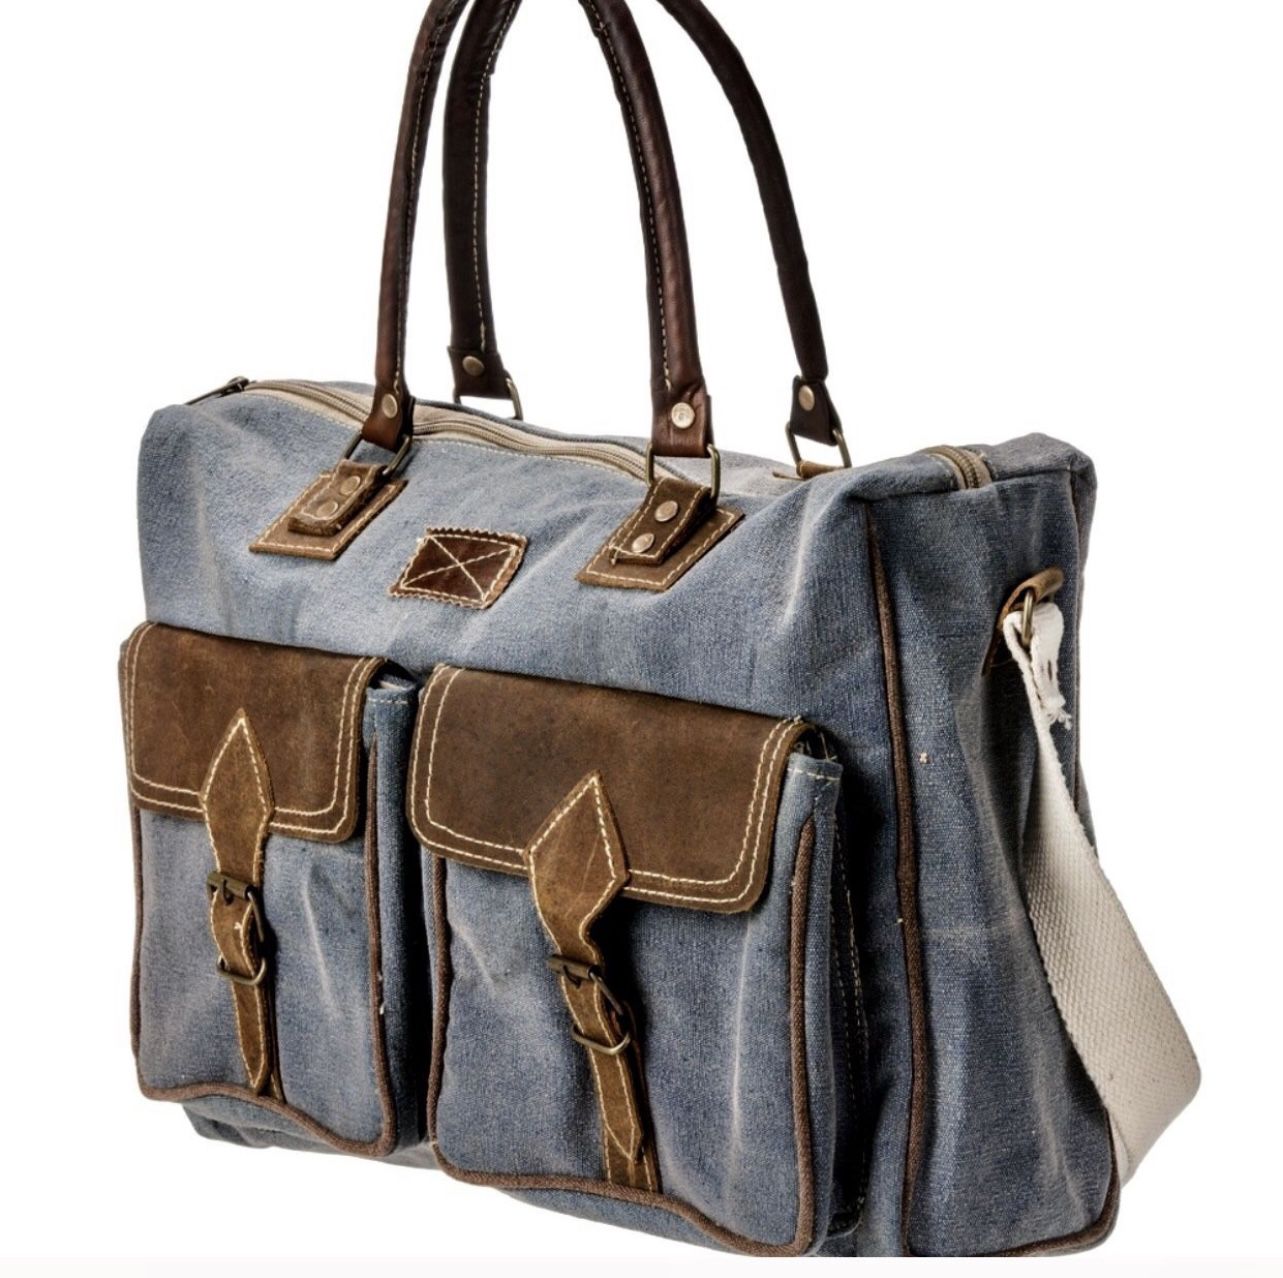 NWT The Barrel Shack’s The Owen Bag - Retails for $240, Selling here for ONLY $45!!